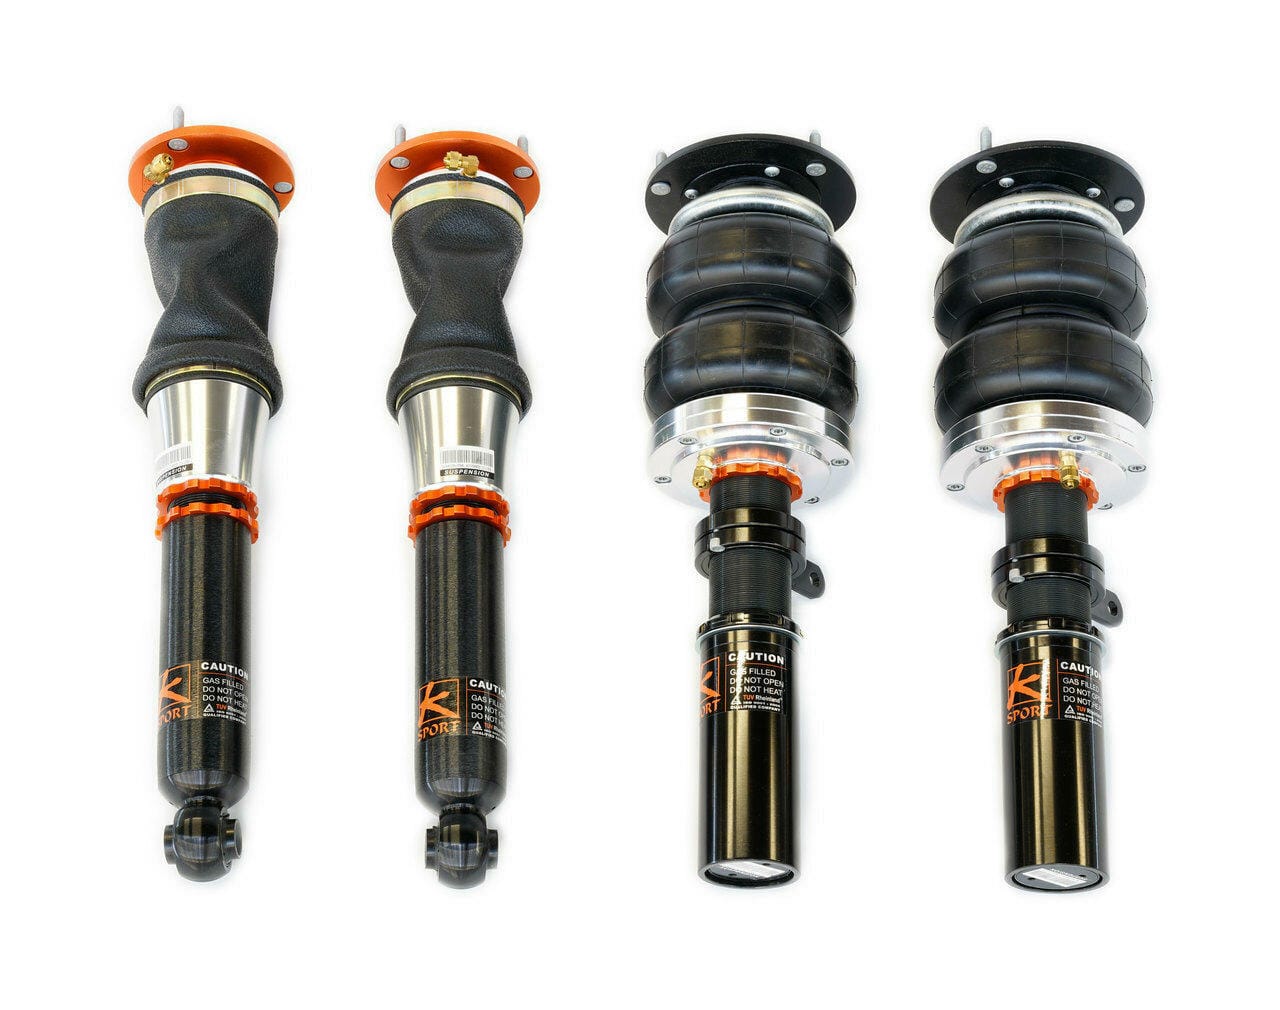 Ksport Airtech Air Suspension System (Struts Only) - 1989-1995 BMW 5 Series 525i, 530i, 535i, 540i w/ 51mm OE Front Strut Weld-In (E34) CBM200-ASO